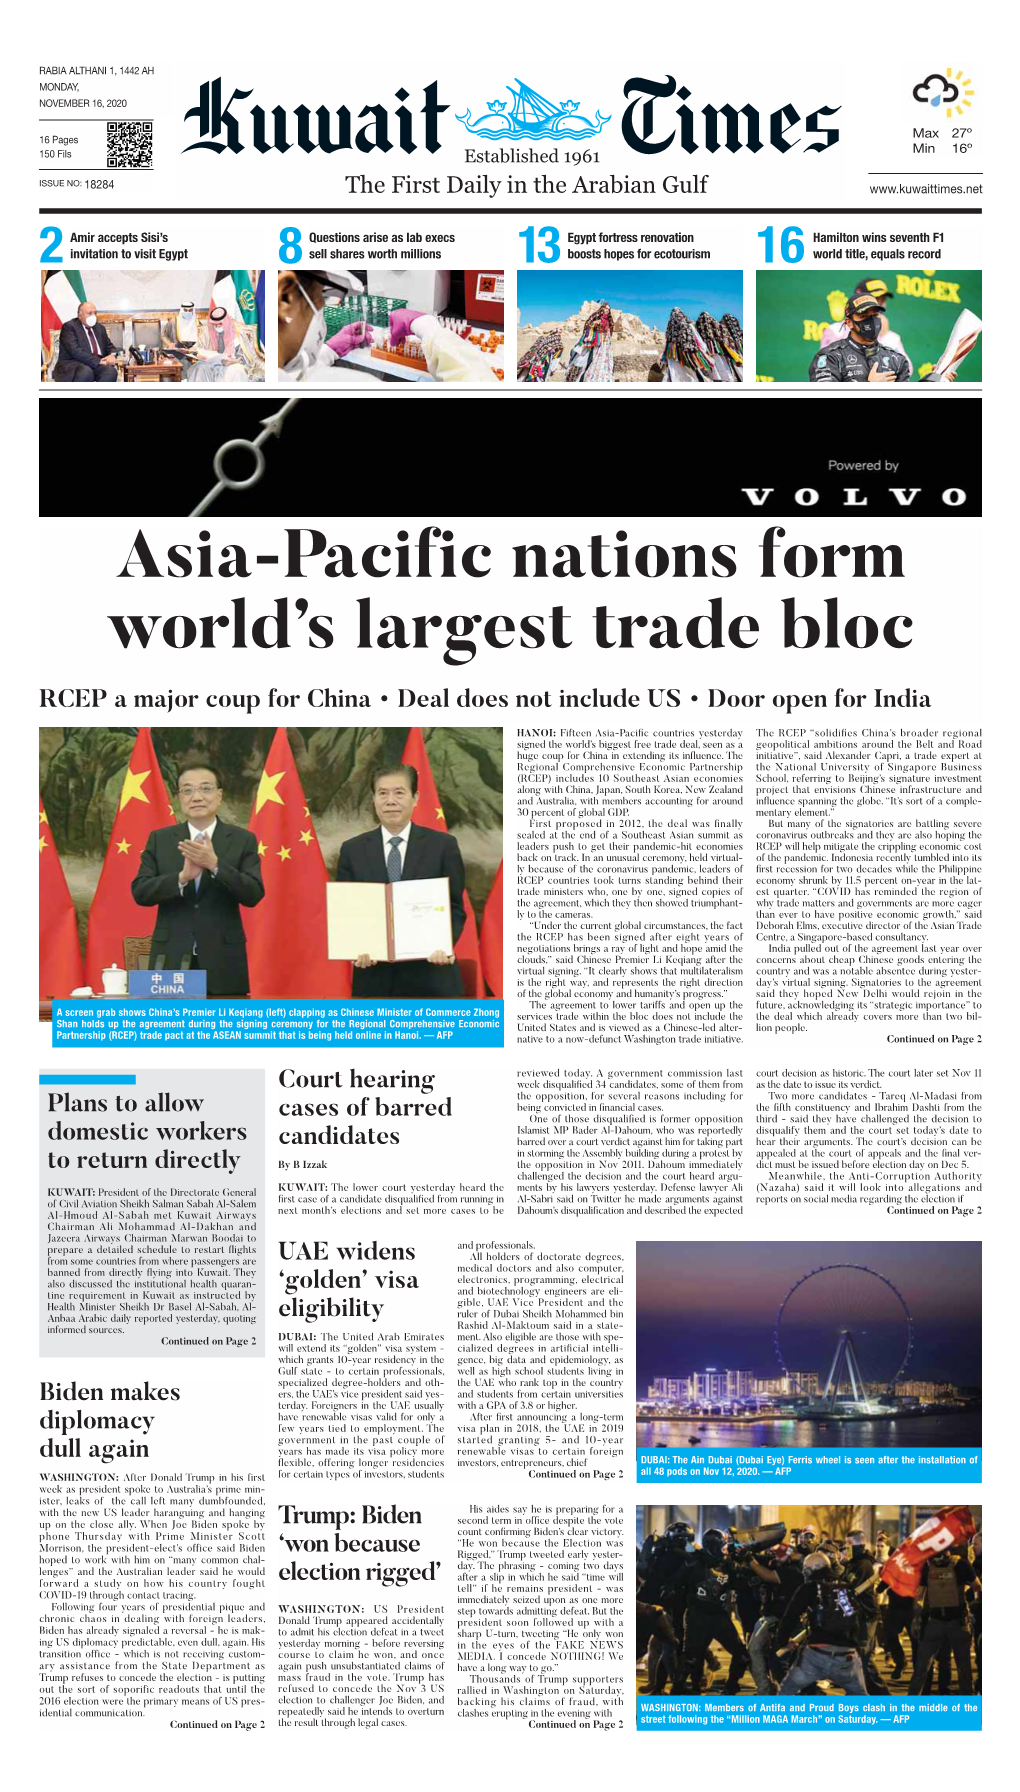 Asia-Pacific Nations Form World's Largest Trade Bloc